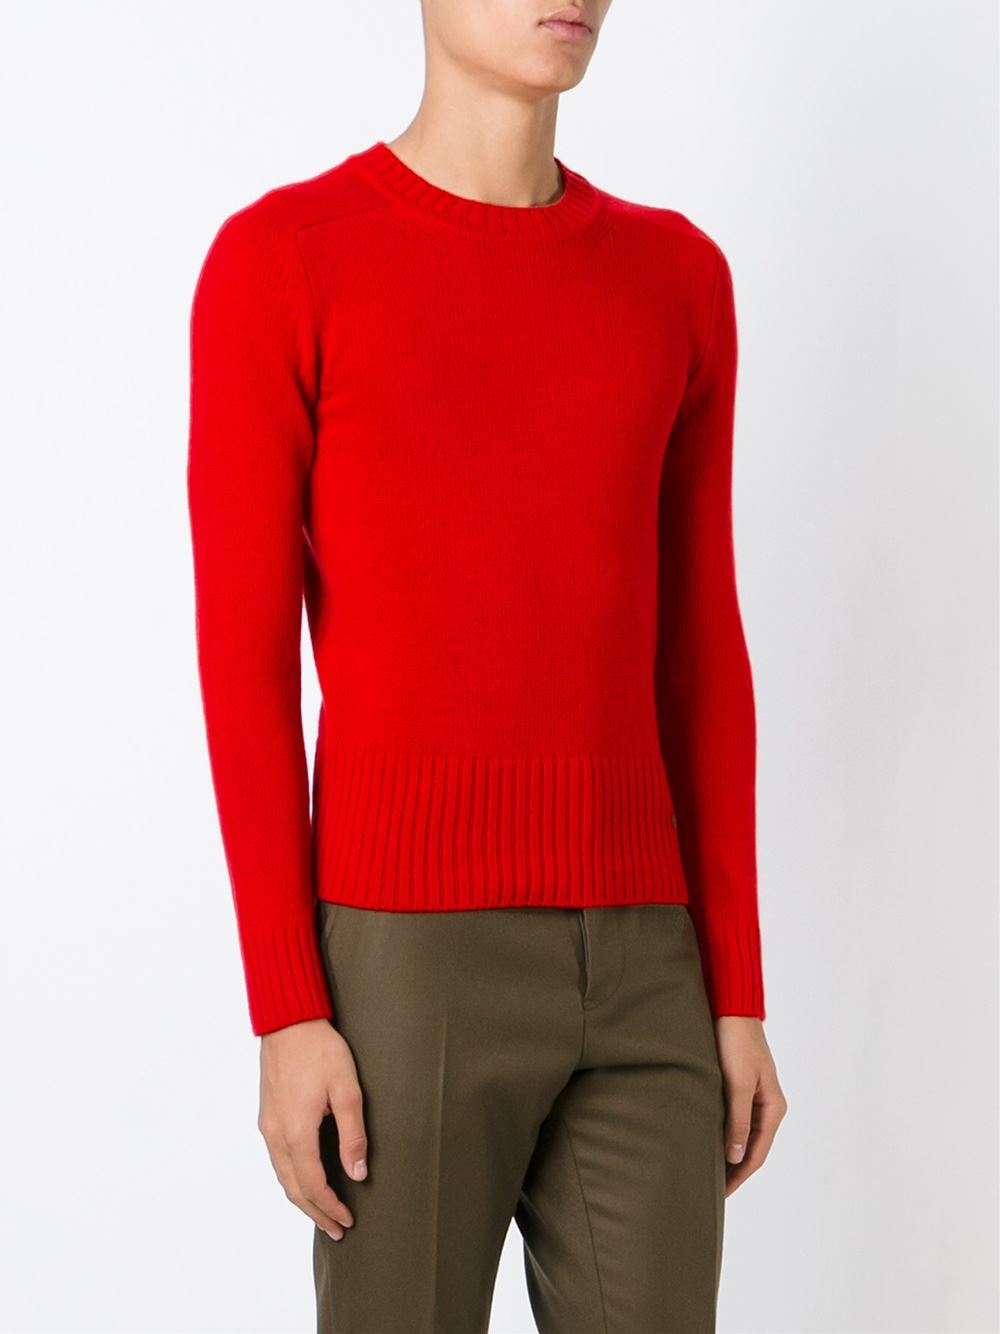 Lyst - Gucci Crew Neck Sweater in Red for Men